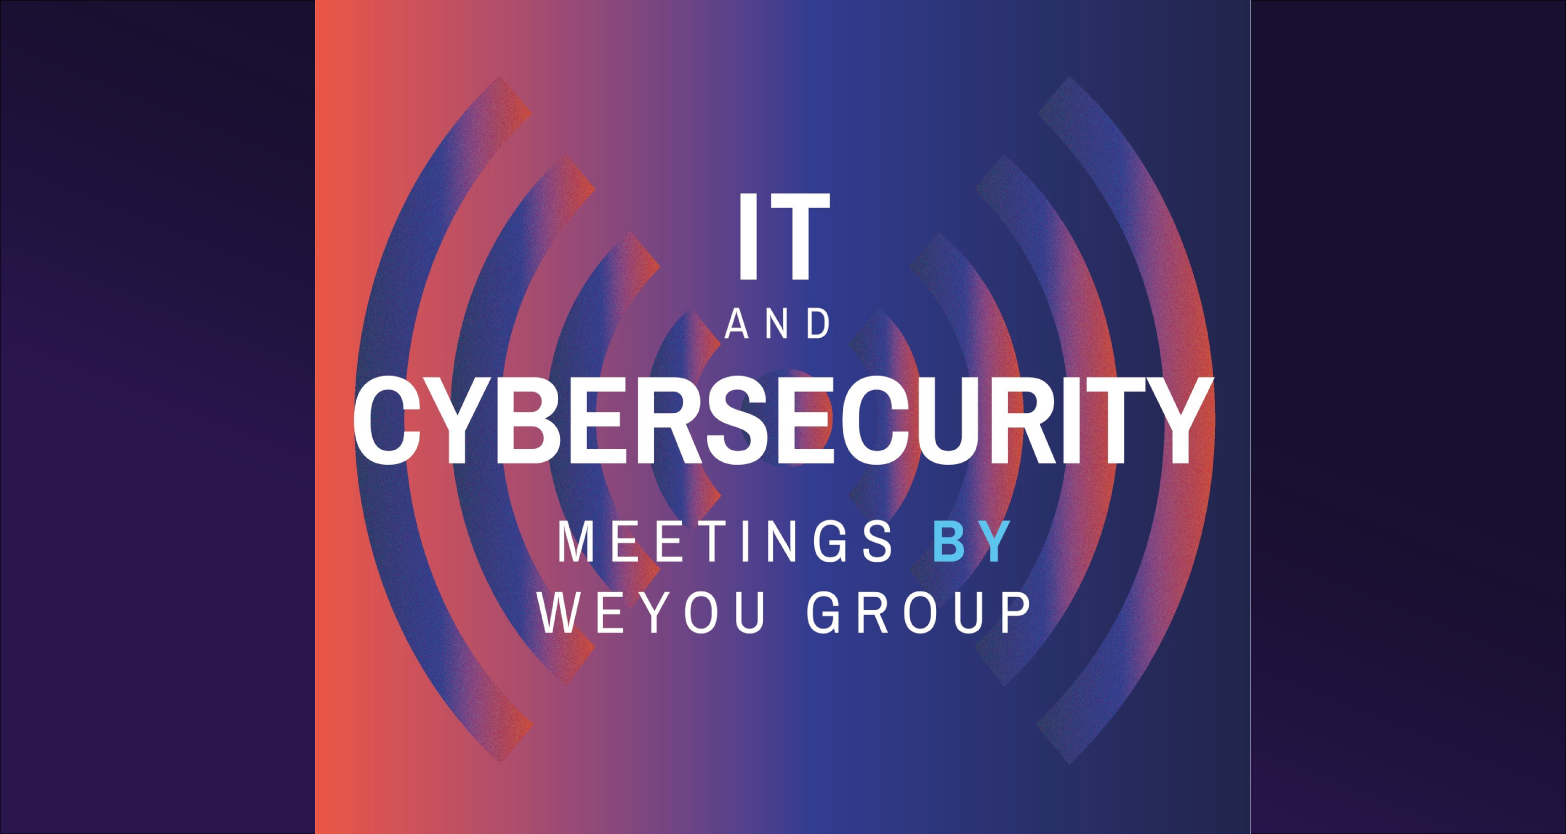 A thumbnail of the IT and Cybersecurity Meetings logo